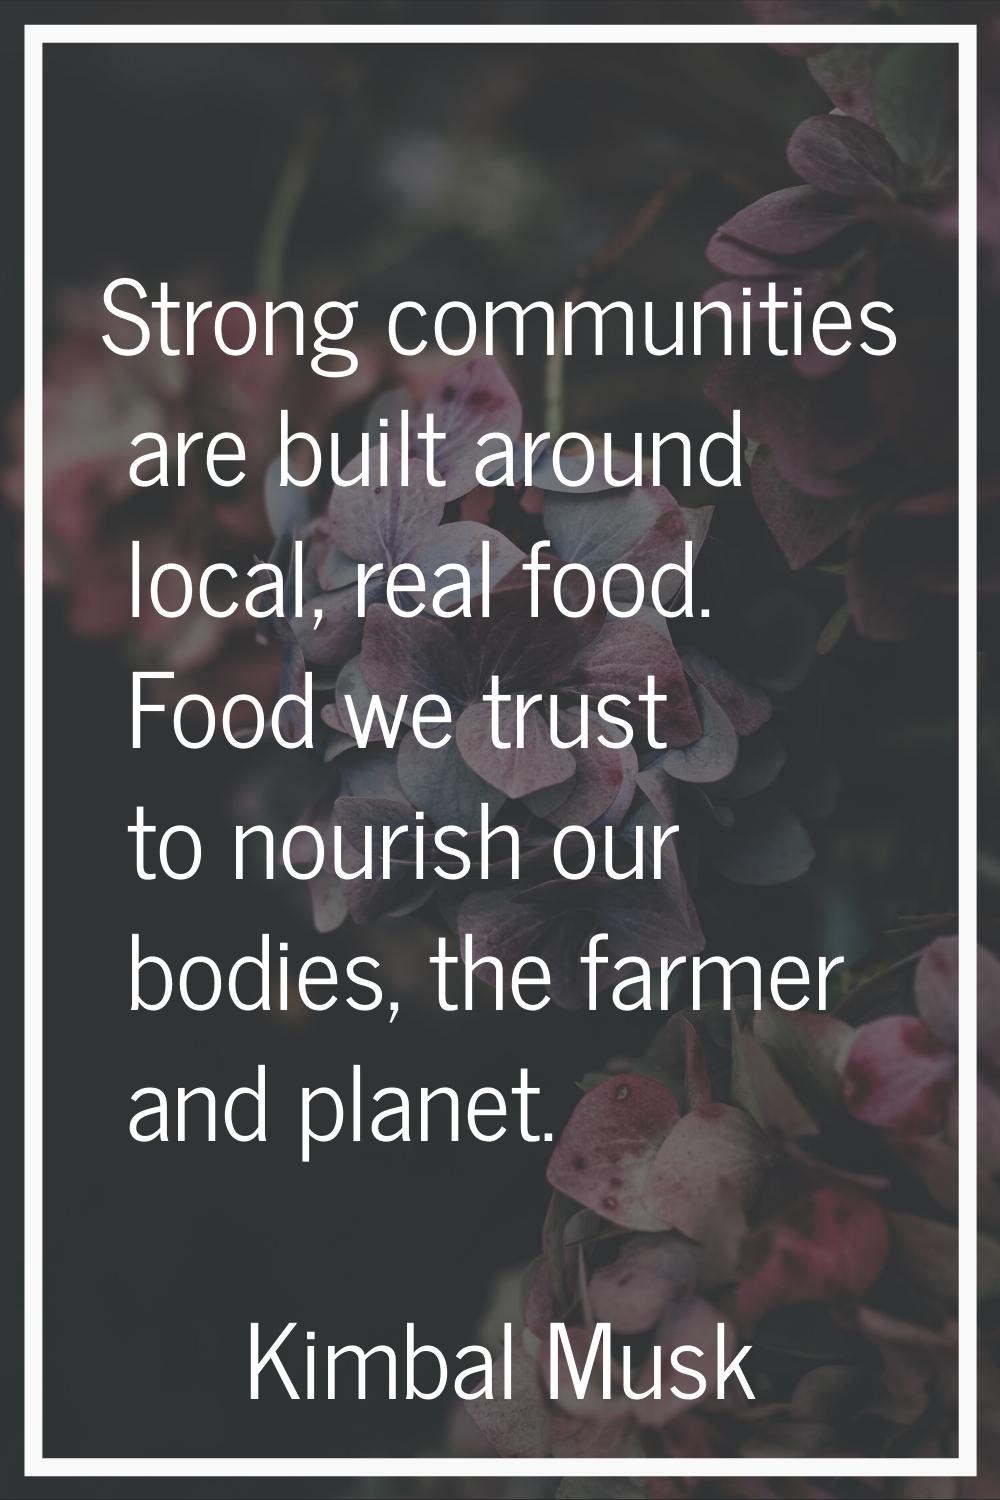 Strong communities are built around local, real food. Food we trust to nourish our bodies, the farm